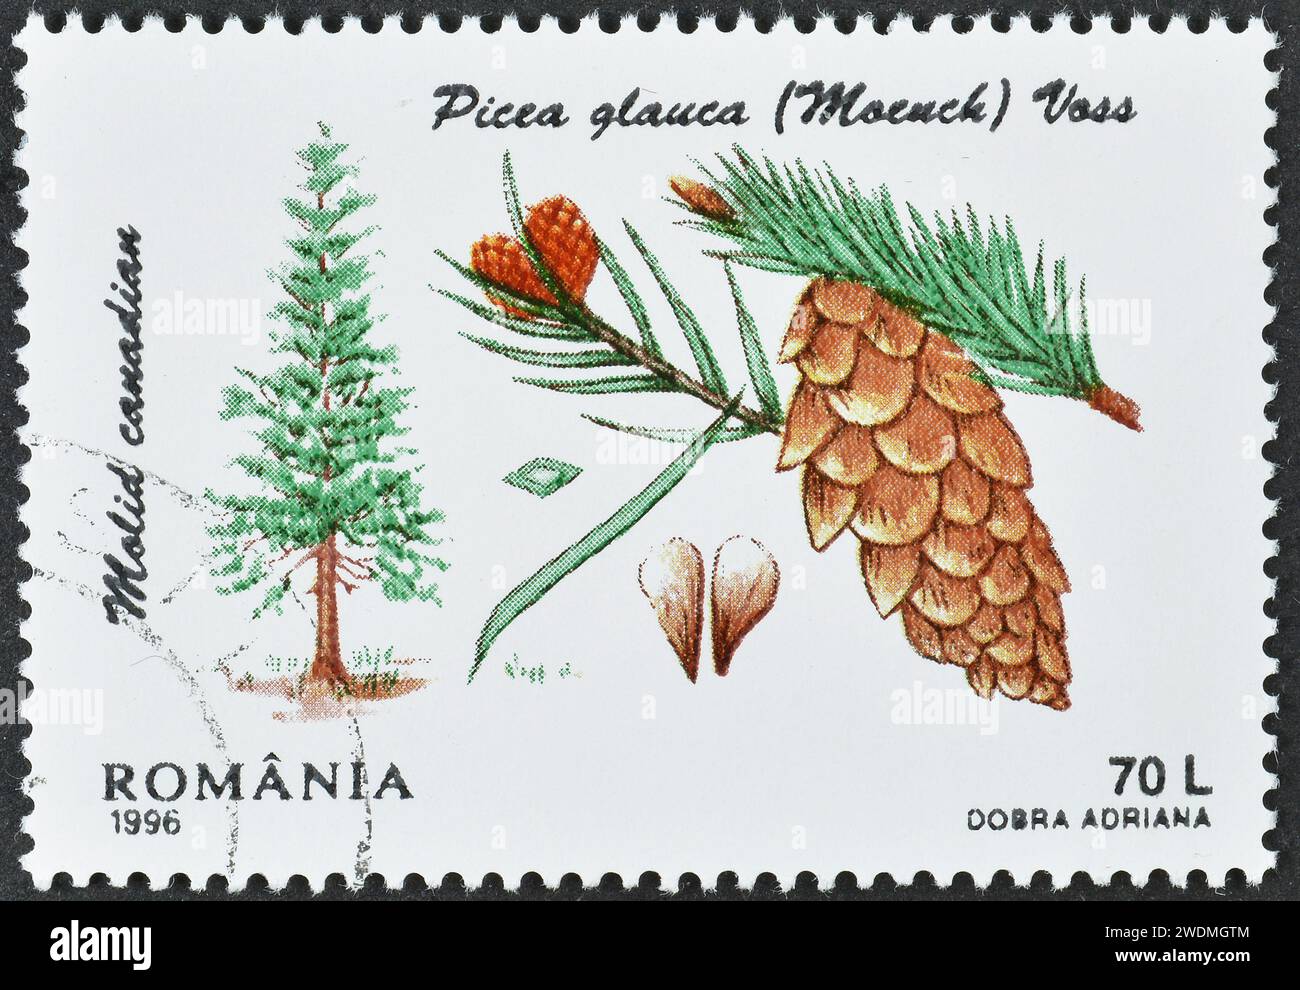 Cancelled postage stamp printed by Romania, that shows White Spruce (Picea glauca), Conifers, circa 1996. Stock Photo